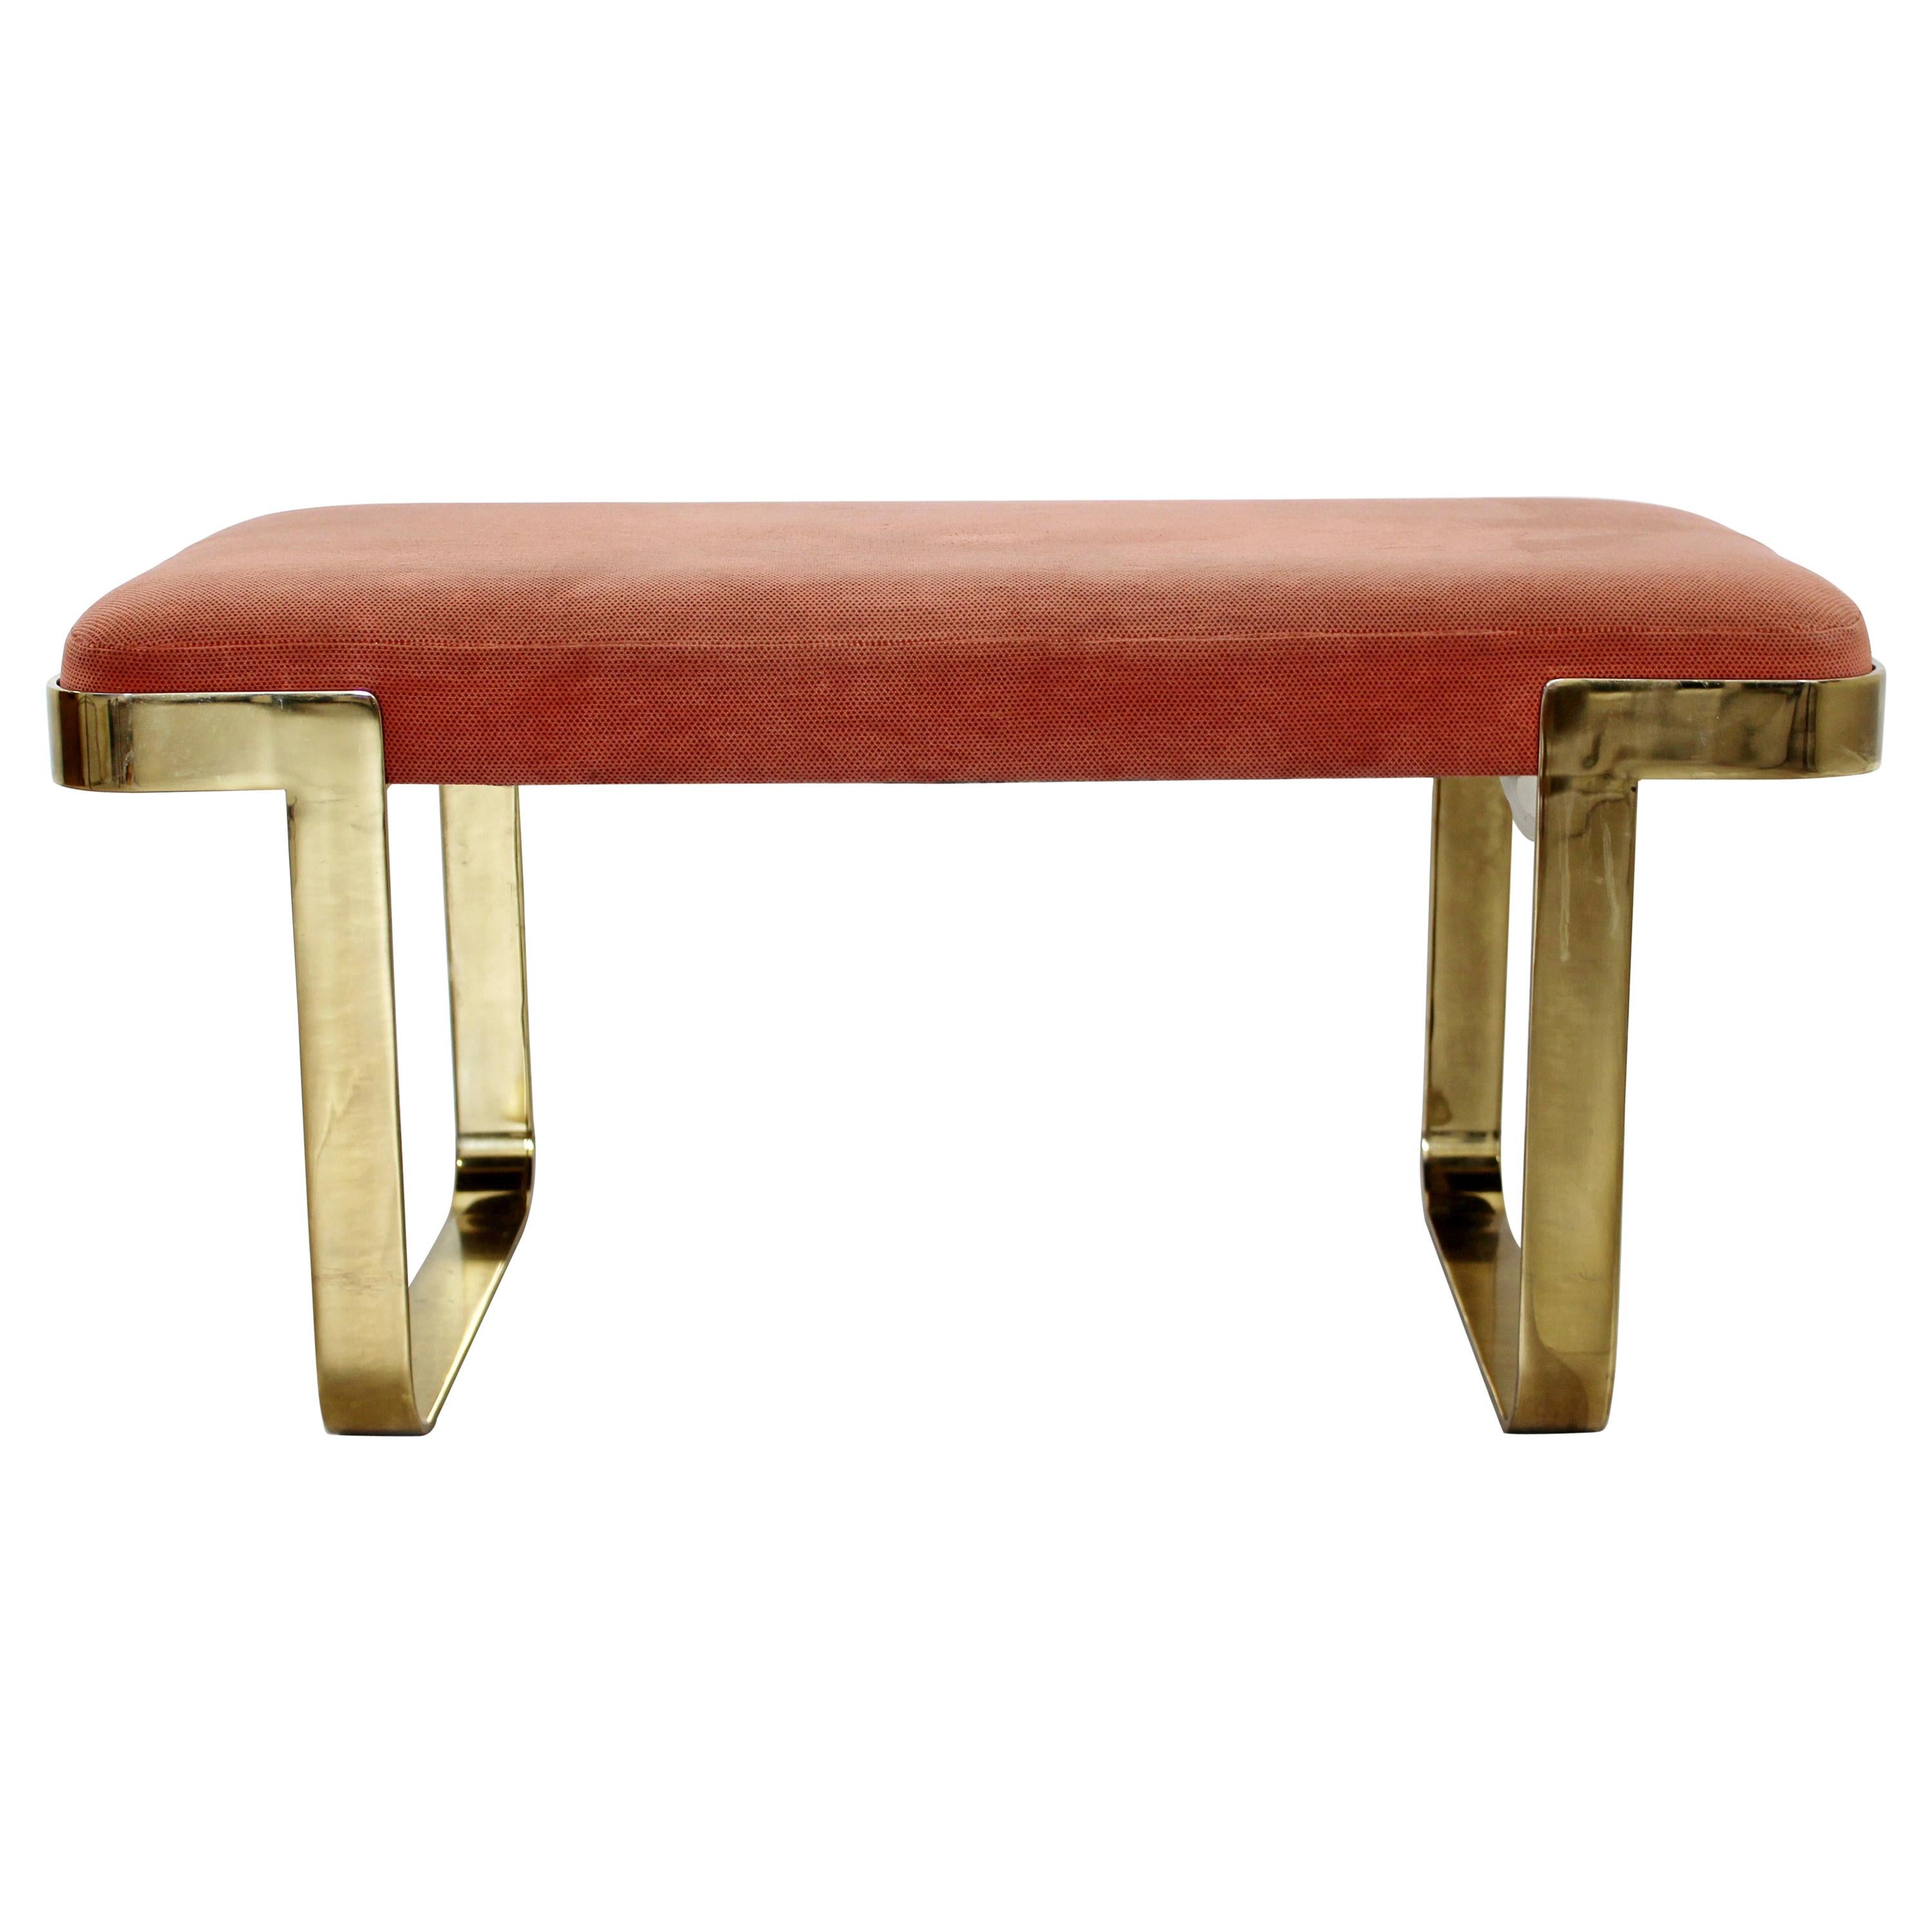 Contemporary Modern Sculptural Flat Curved Brass Bench Seat Pace DIA Style 1980s